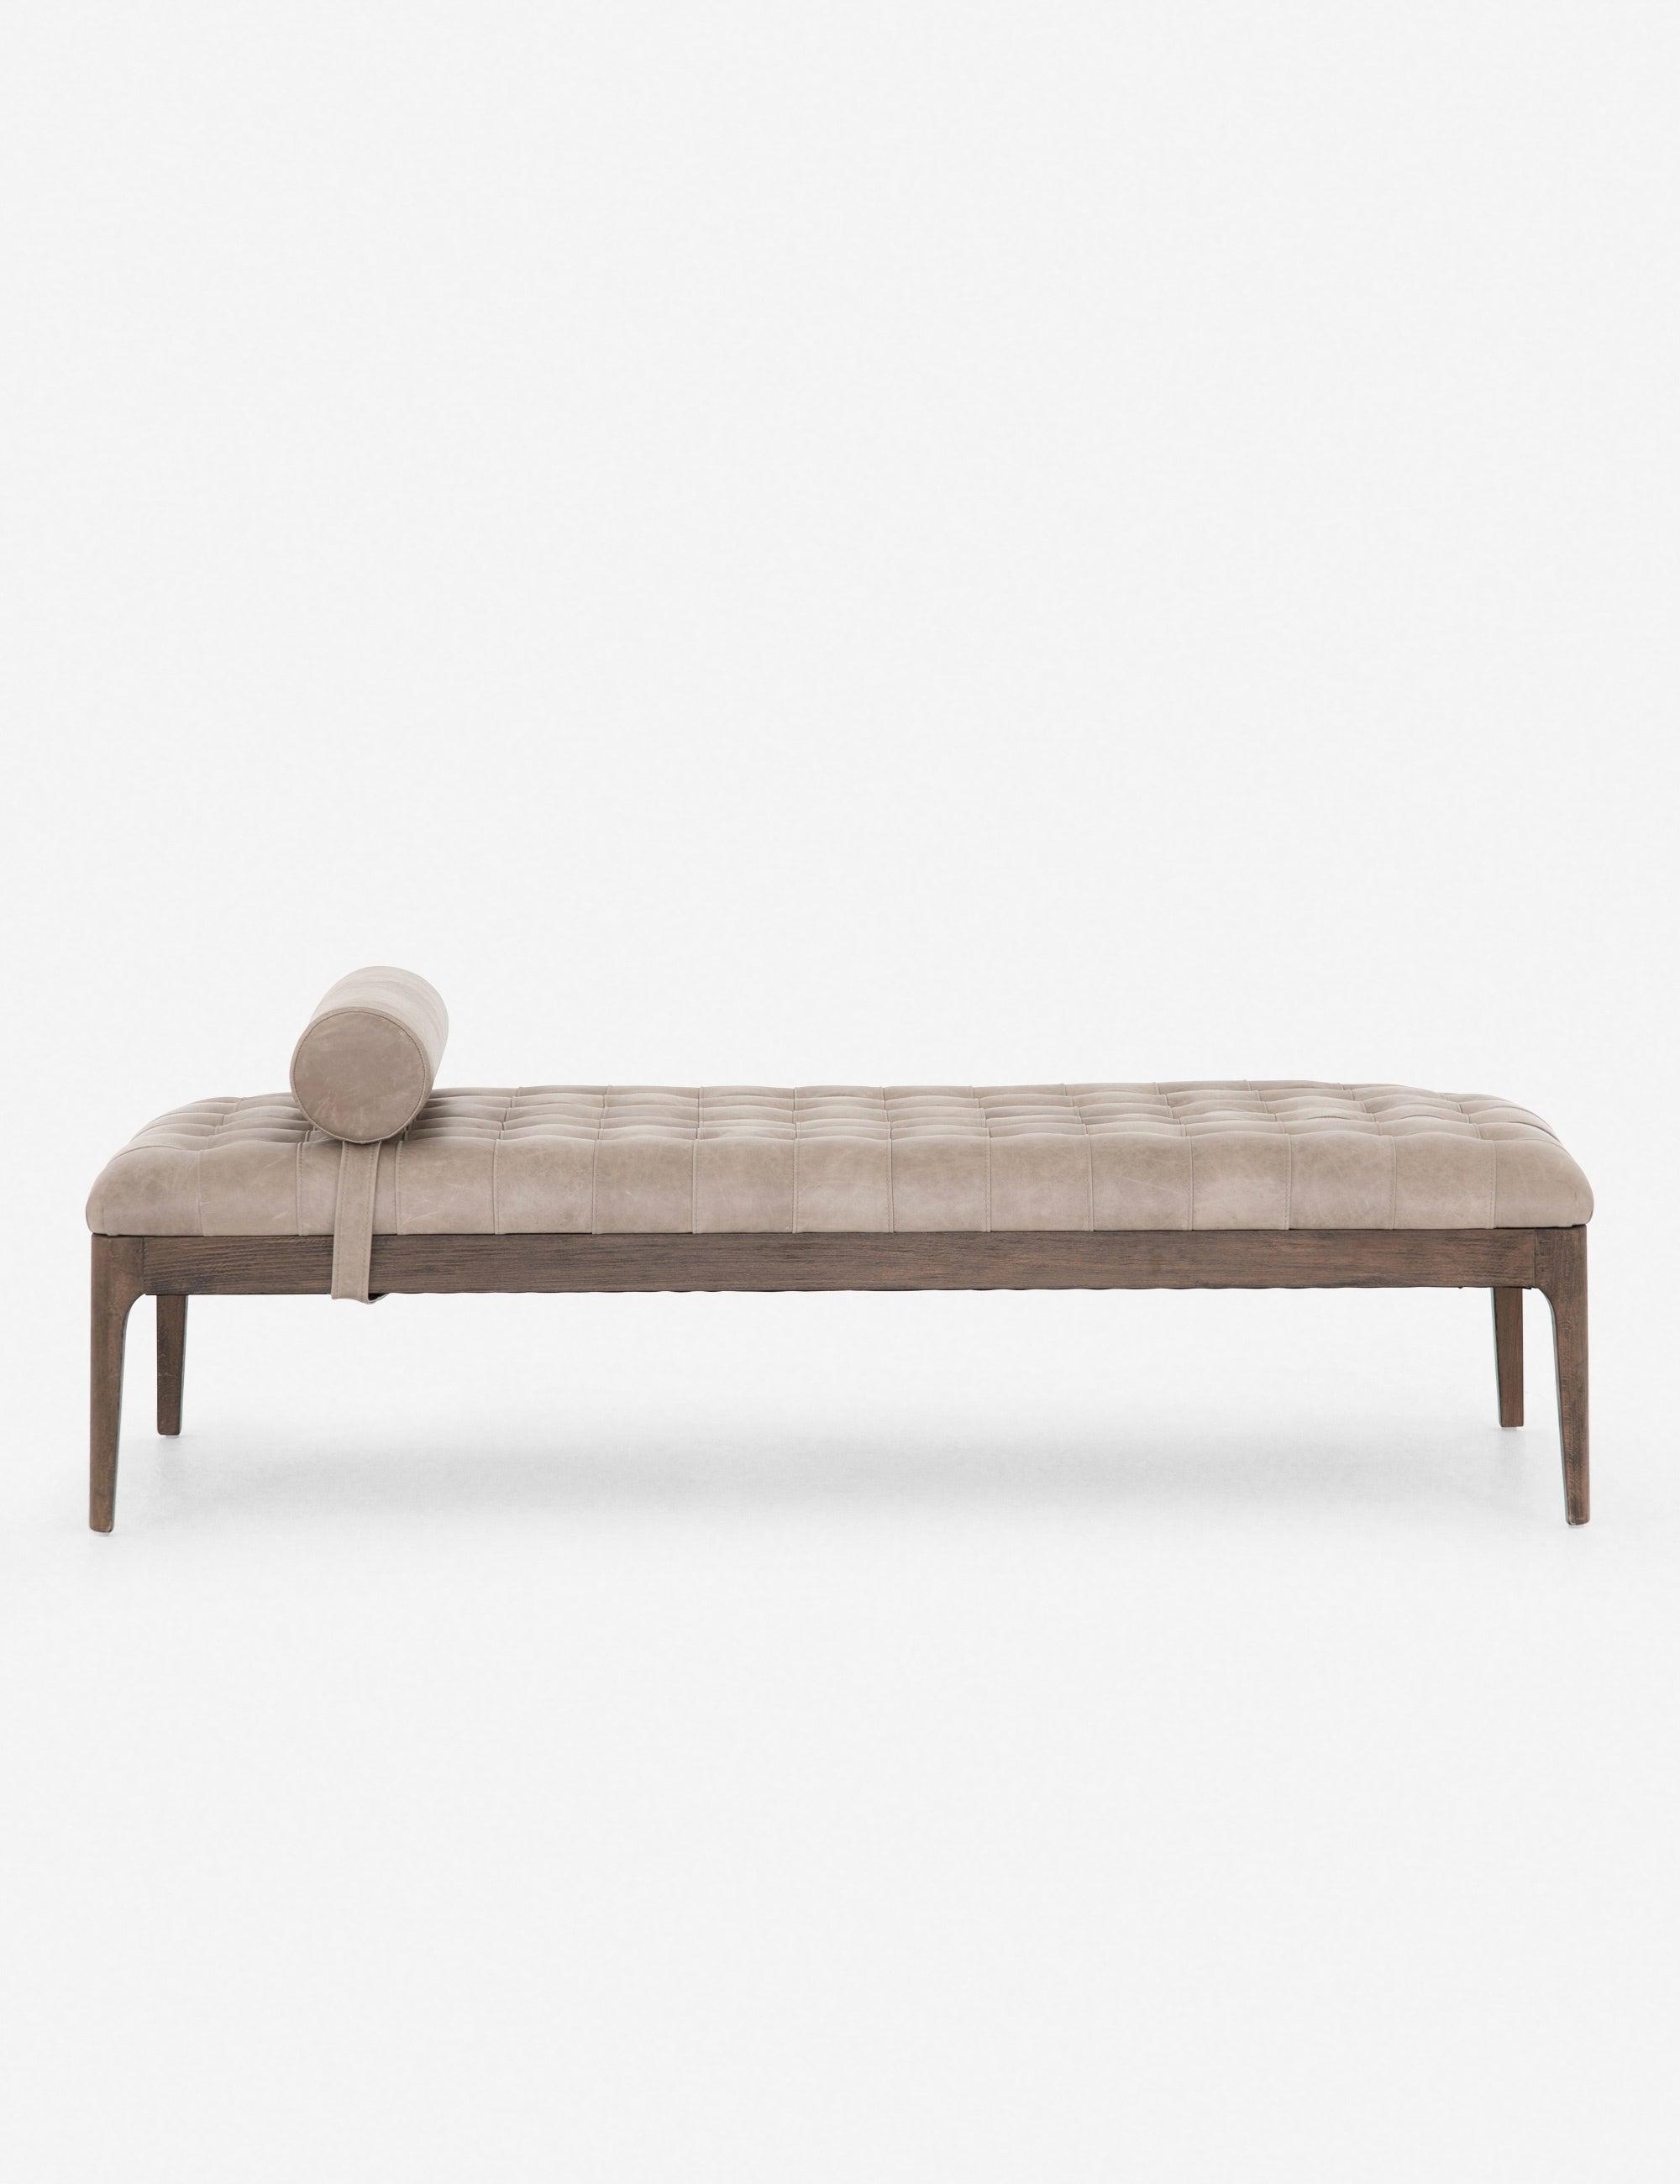 Modern Sonoma Grey 71.5" Tufted Leather Bench with Bolster Pillow